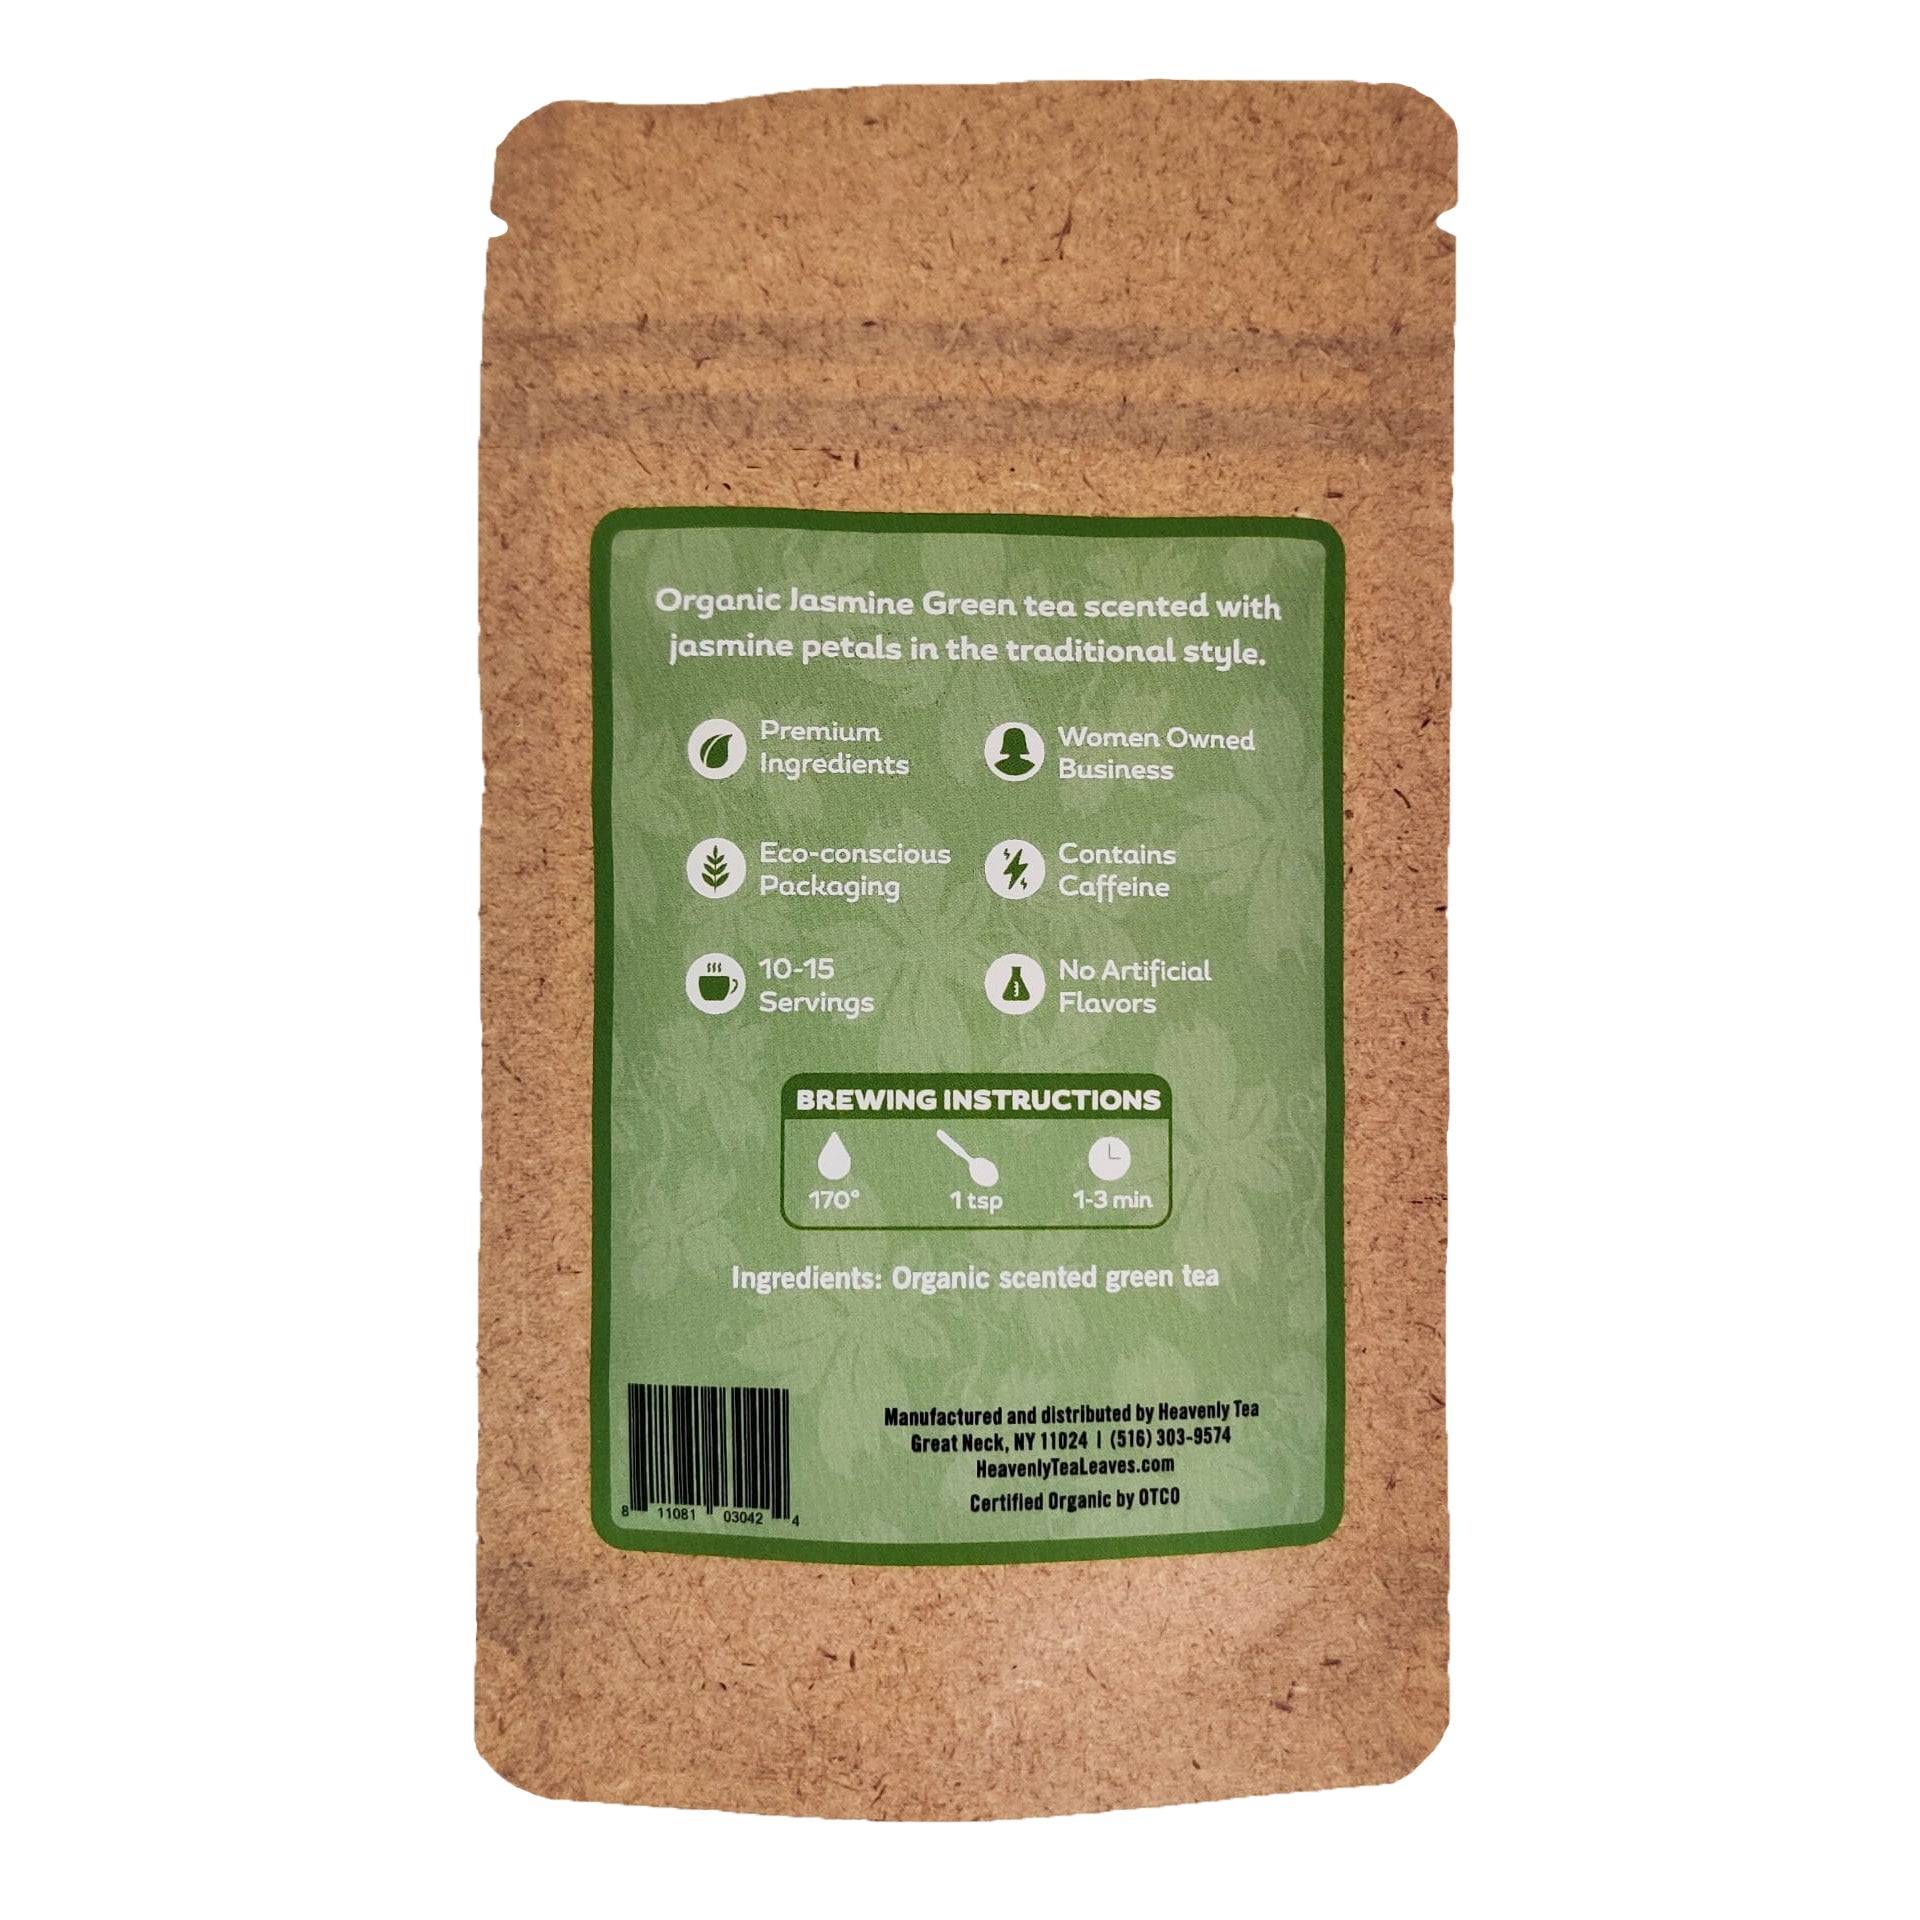 Organic Jasmine Green, Essentials Collection, .96 Oz. - USDA Organic & OU Kosher - Compostable Packaging - Contains Caffeine - Heavenly Tea Leaves